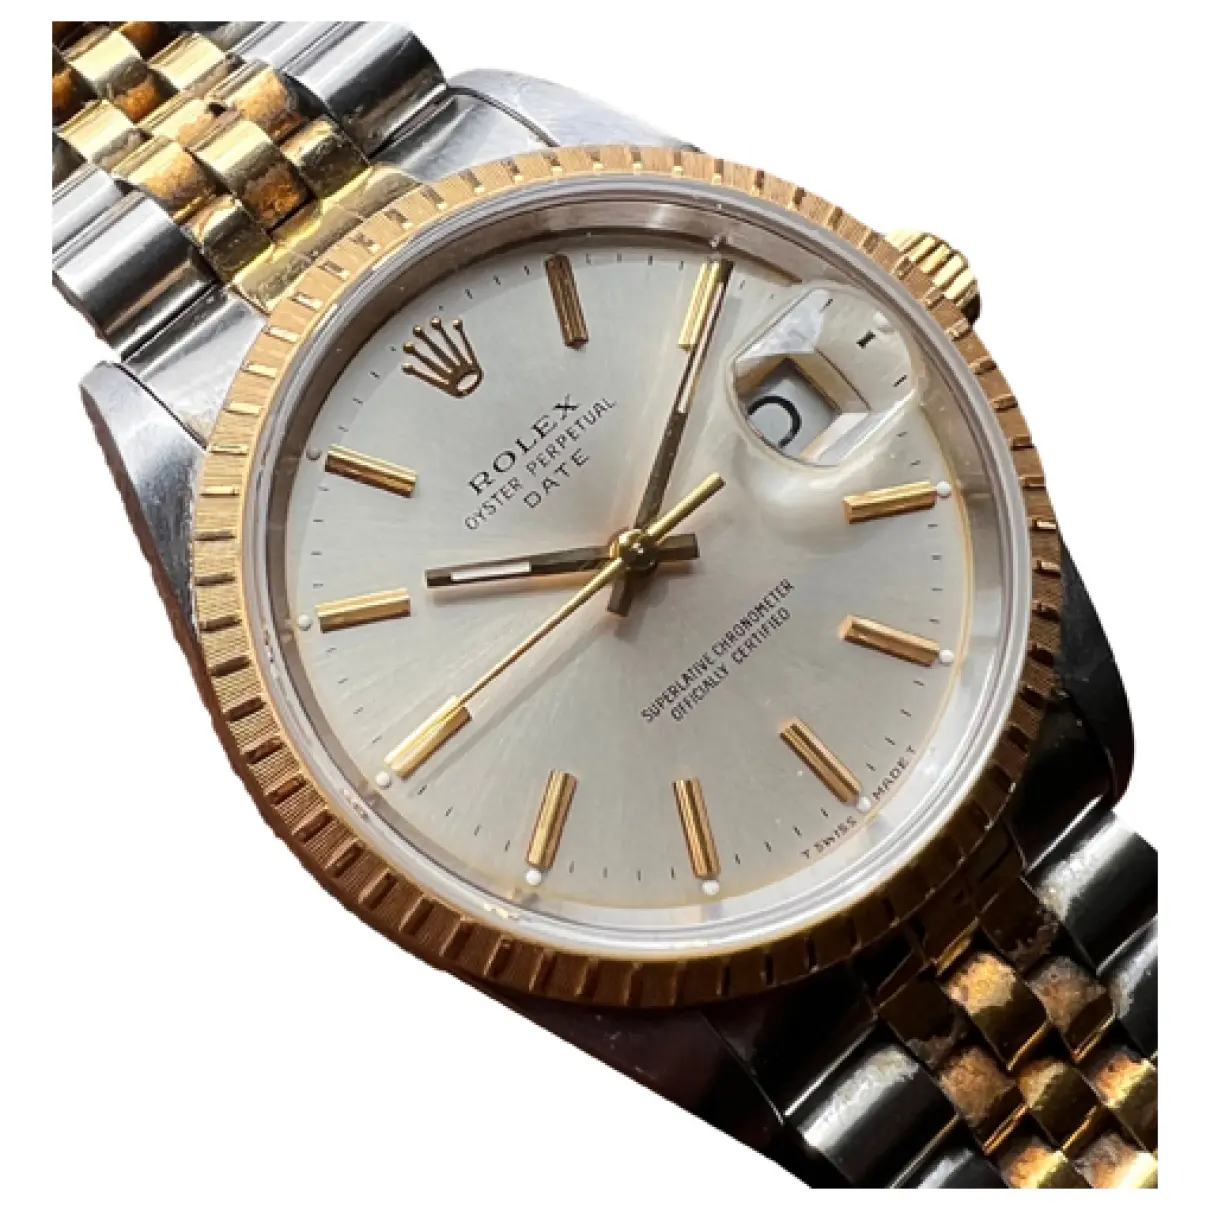 Oyster Perpetual 36mm yellow gold watch